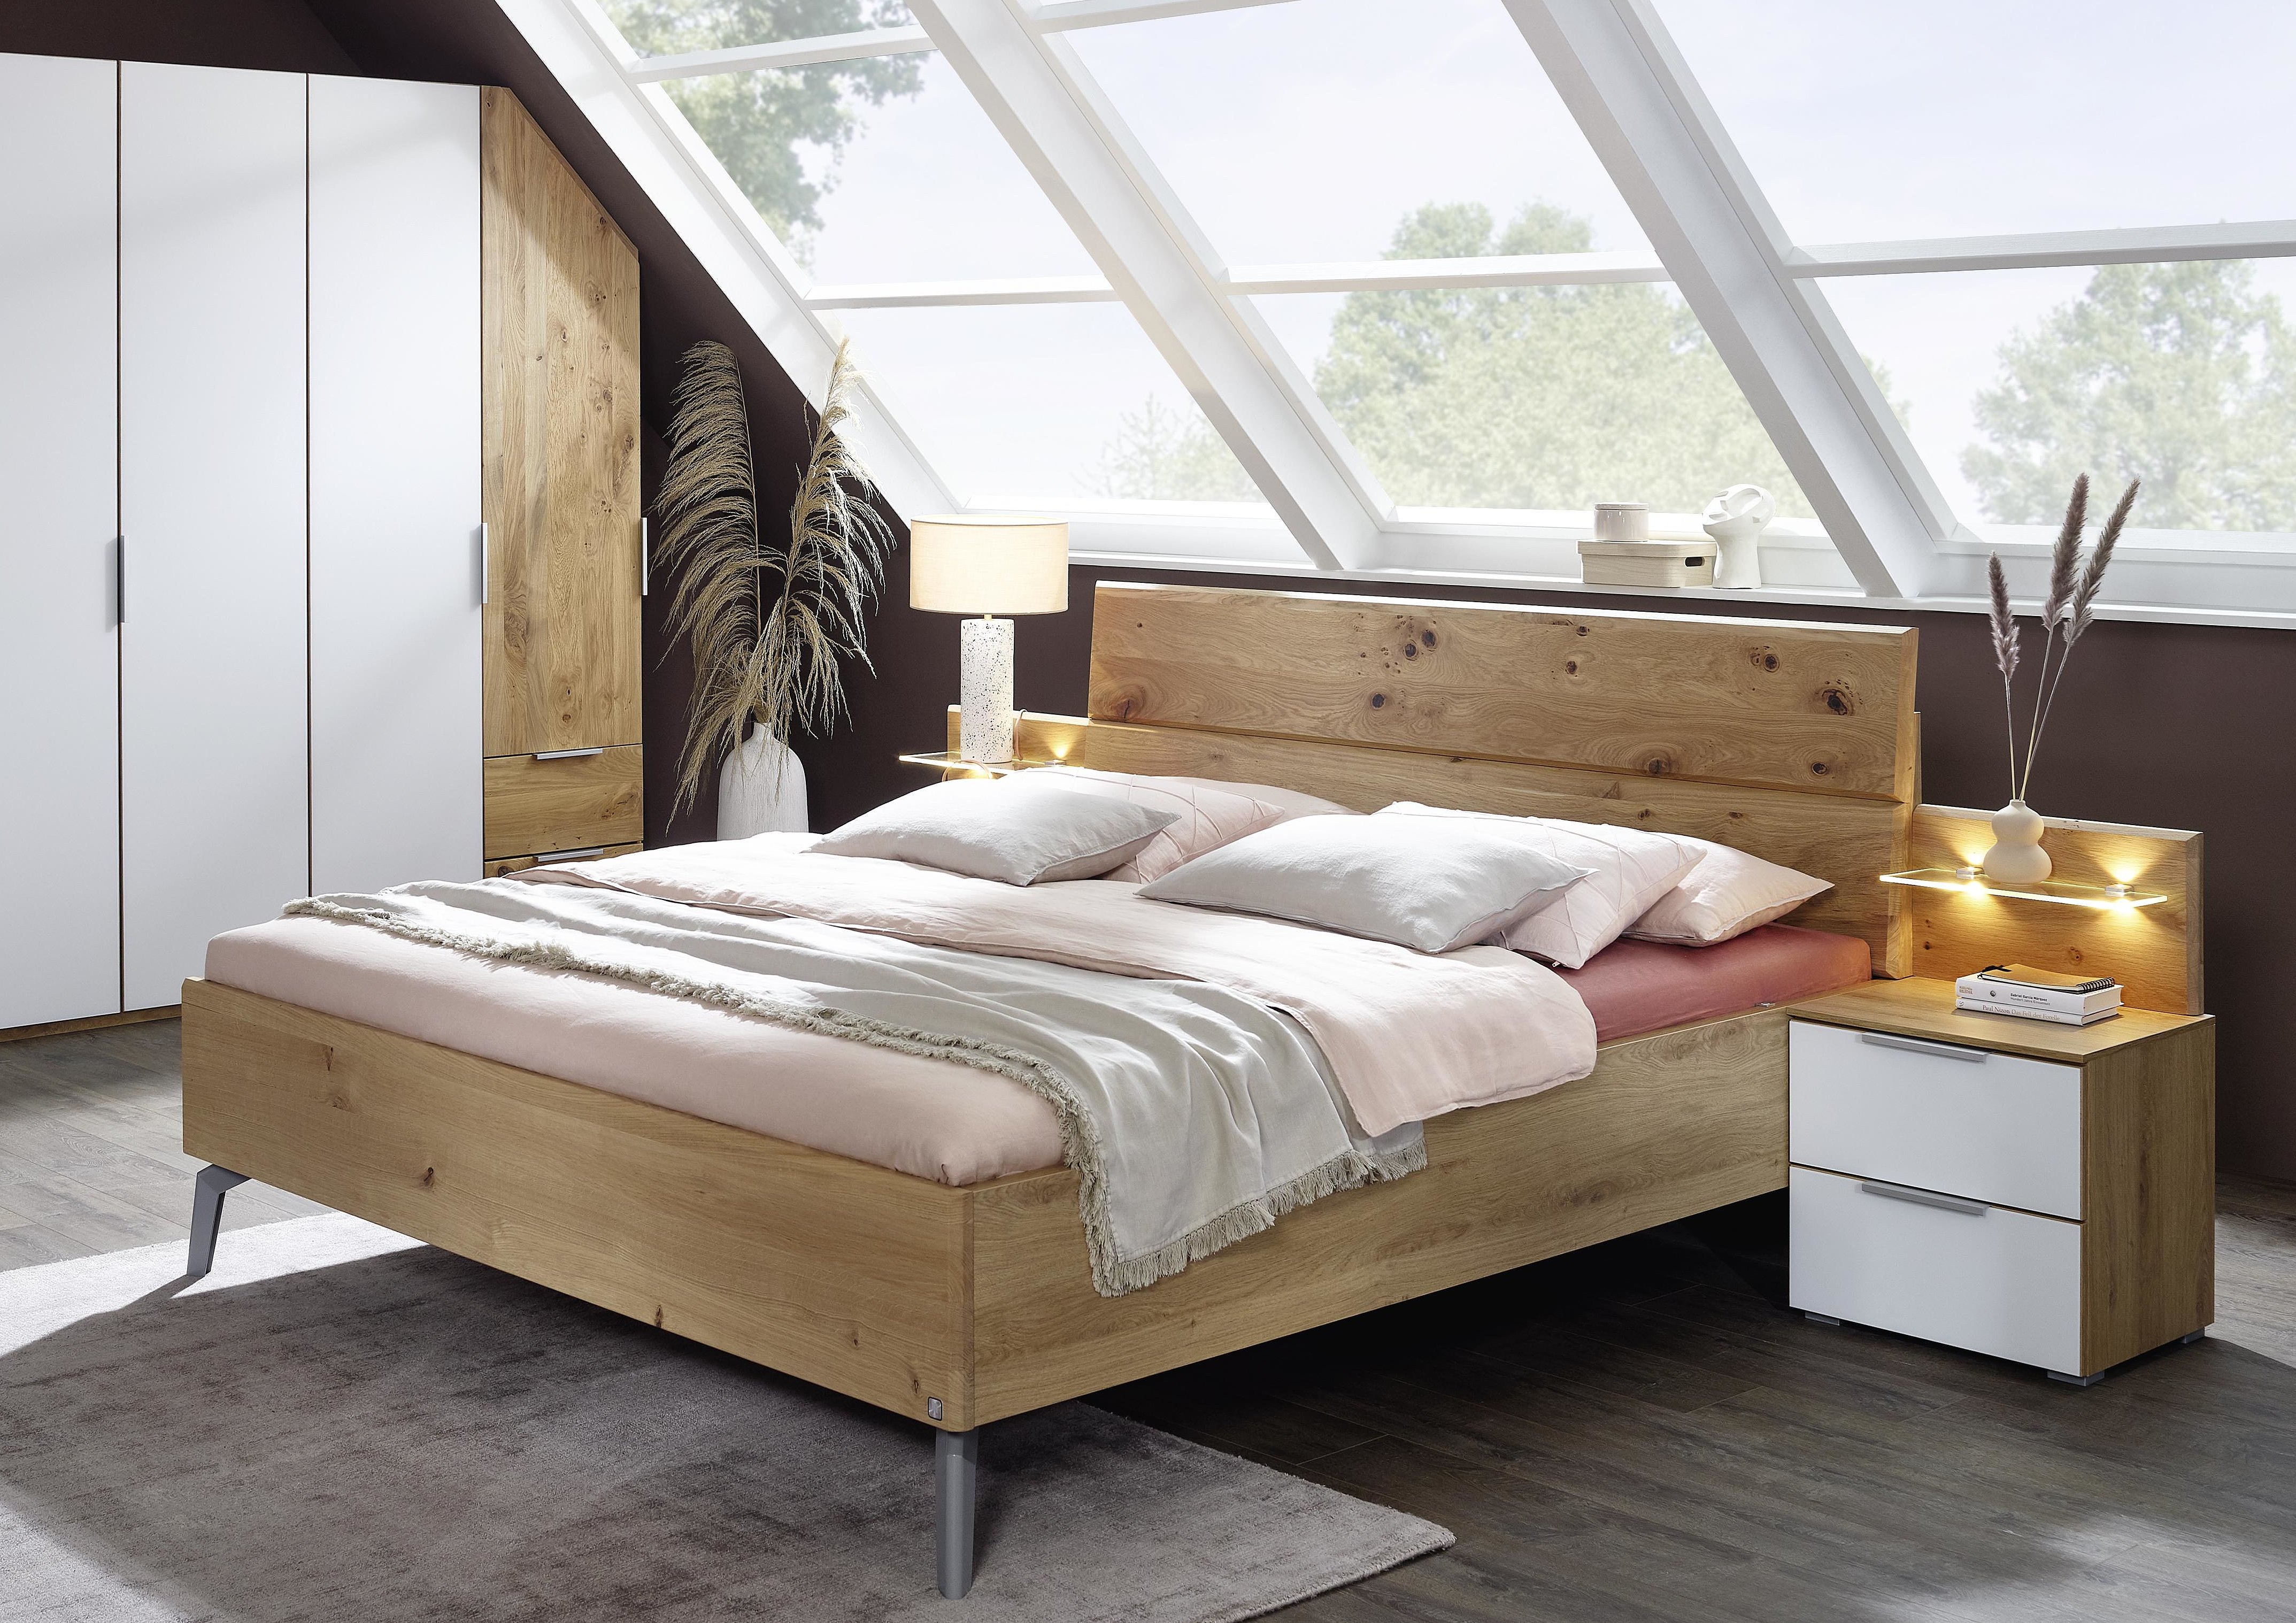 Wardrobe - Bed - Bedside table - Sloping roof